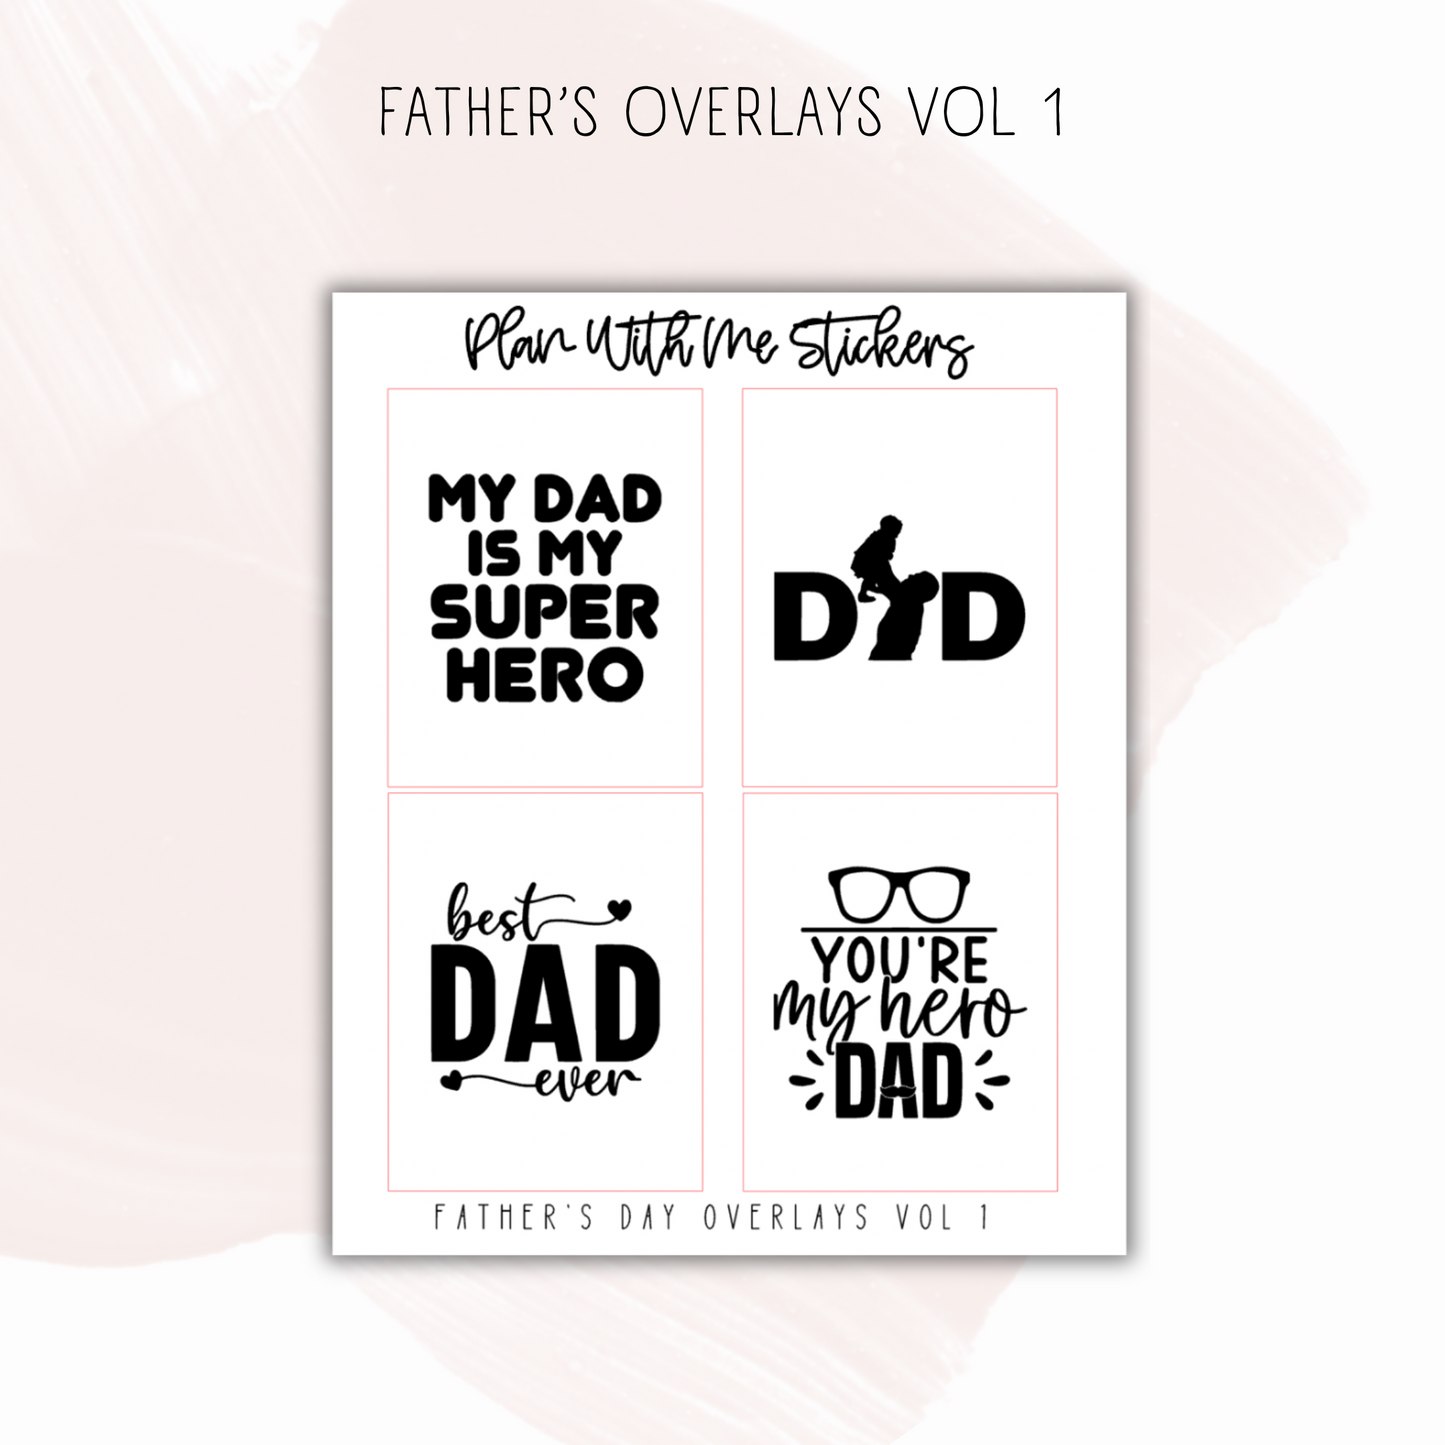 Father's Day Overlays Vol 1